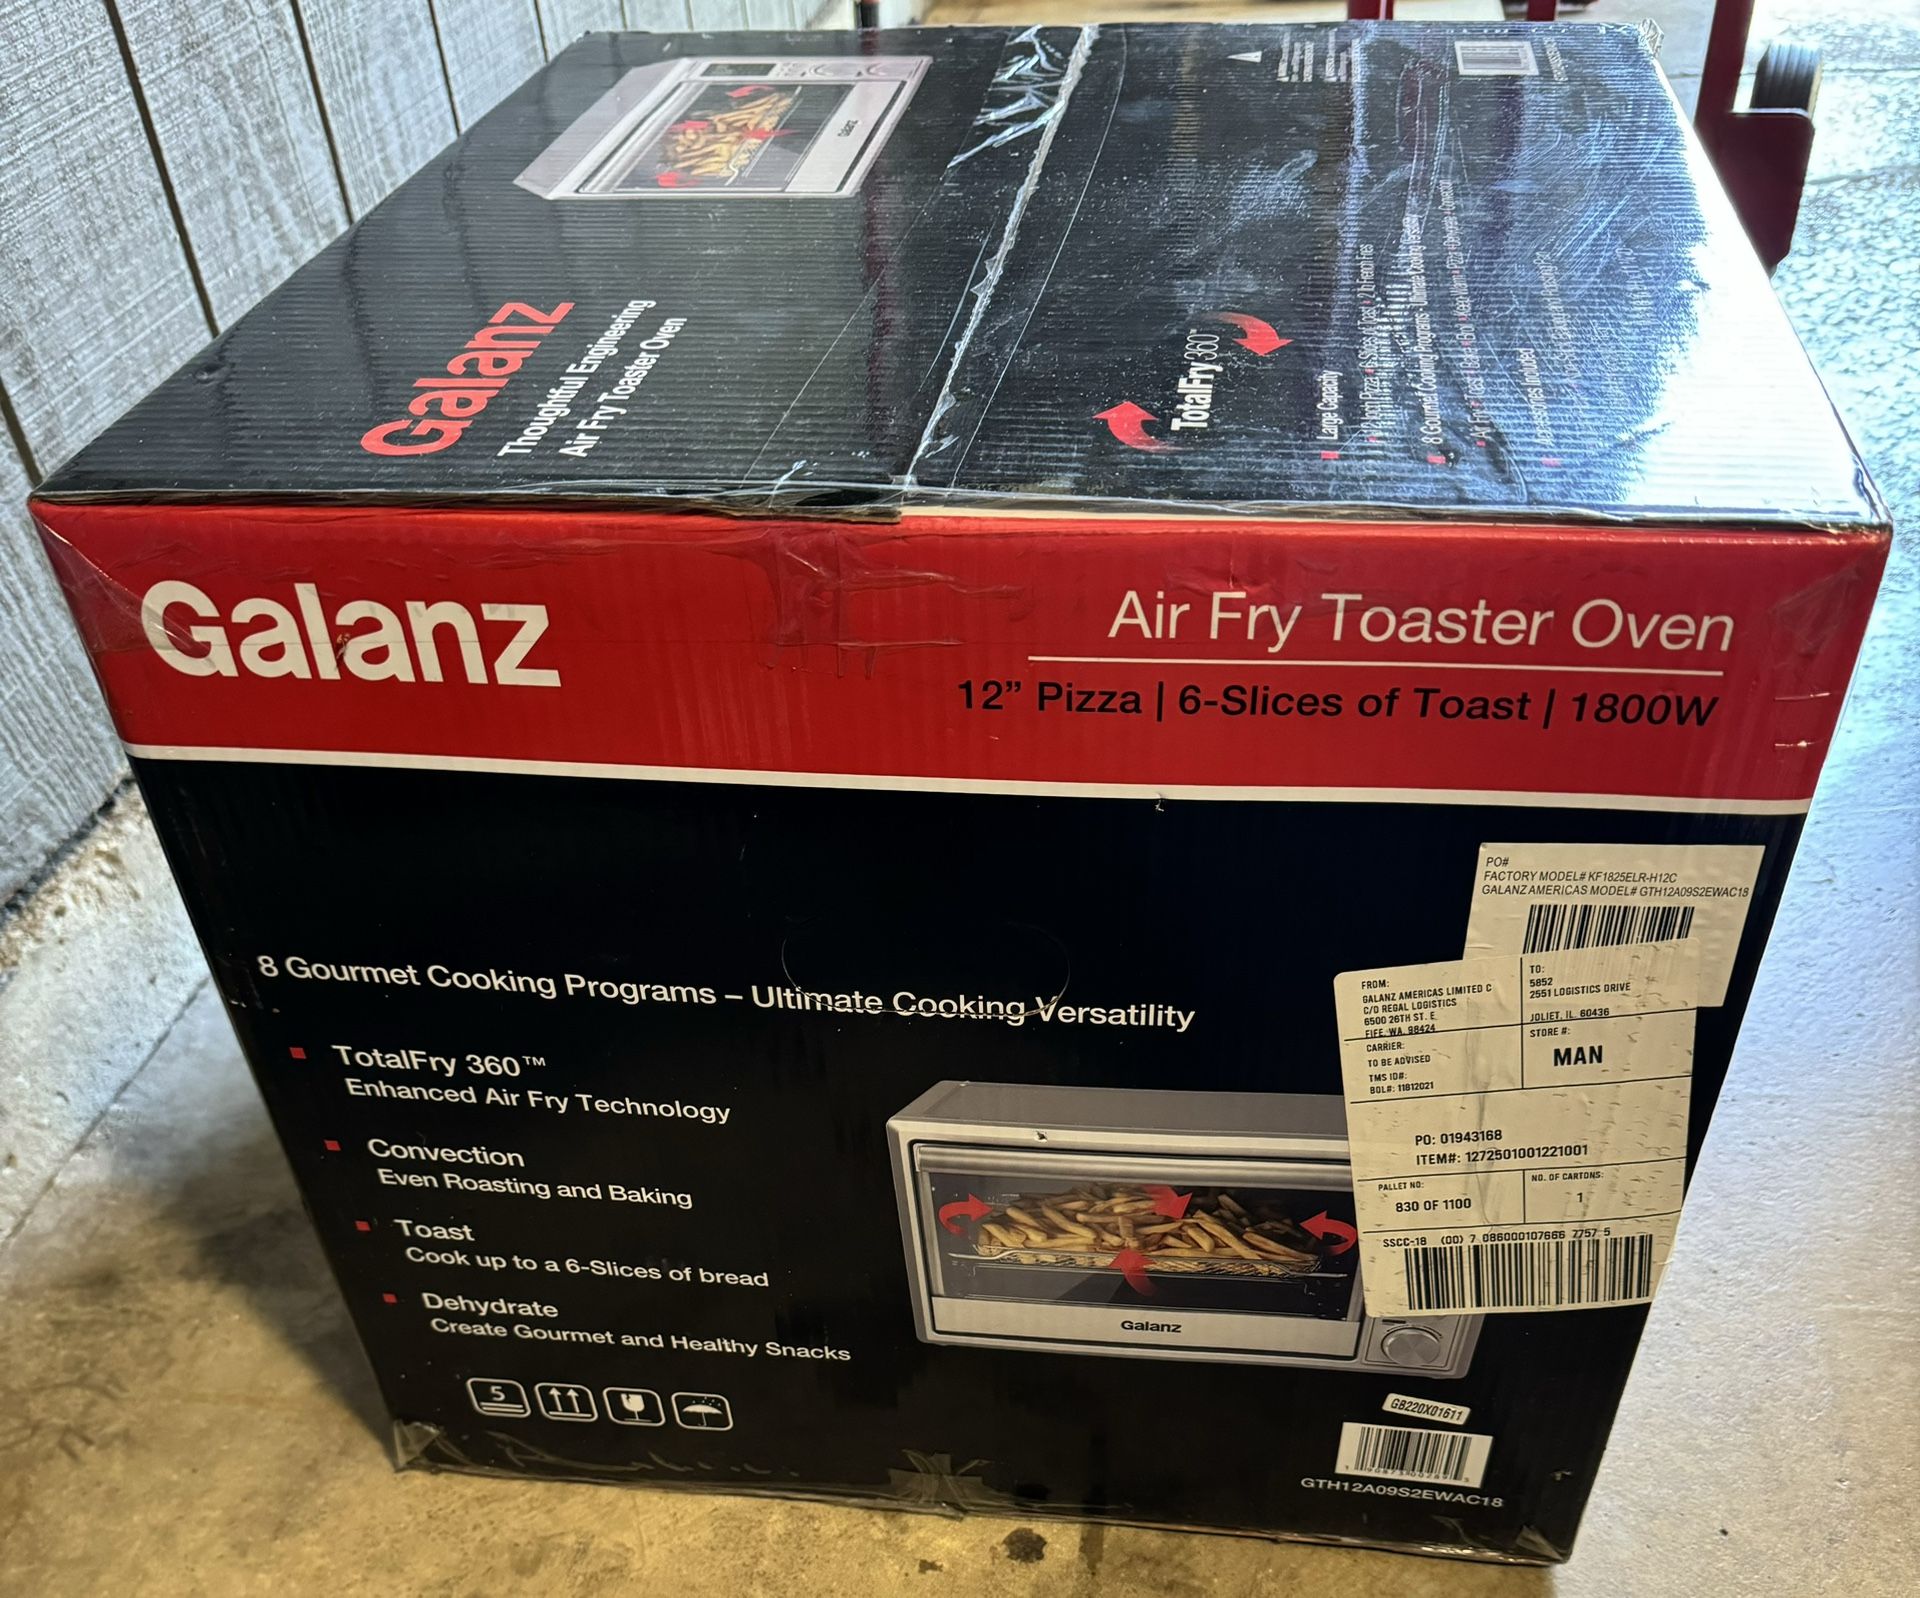 Galanz Air fry Toaster Oven